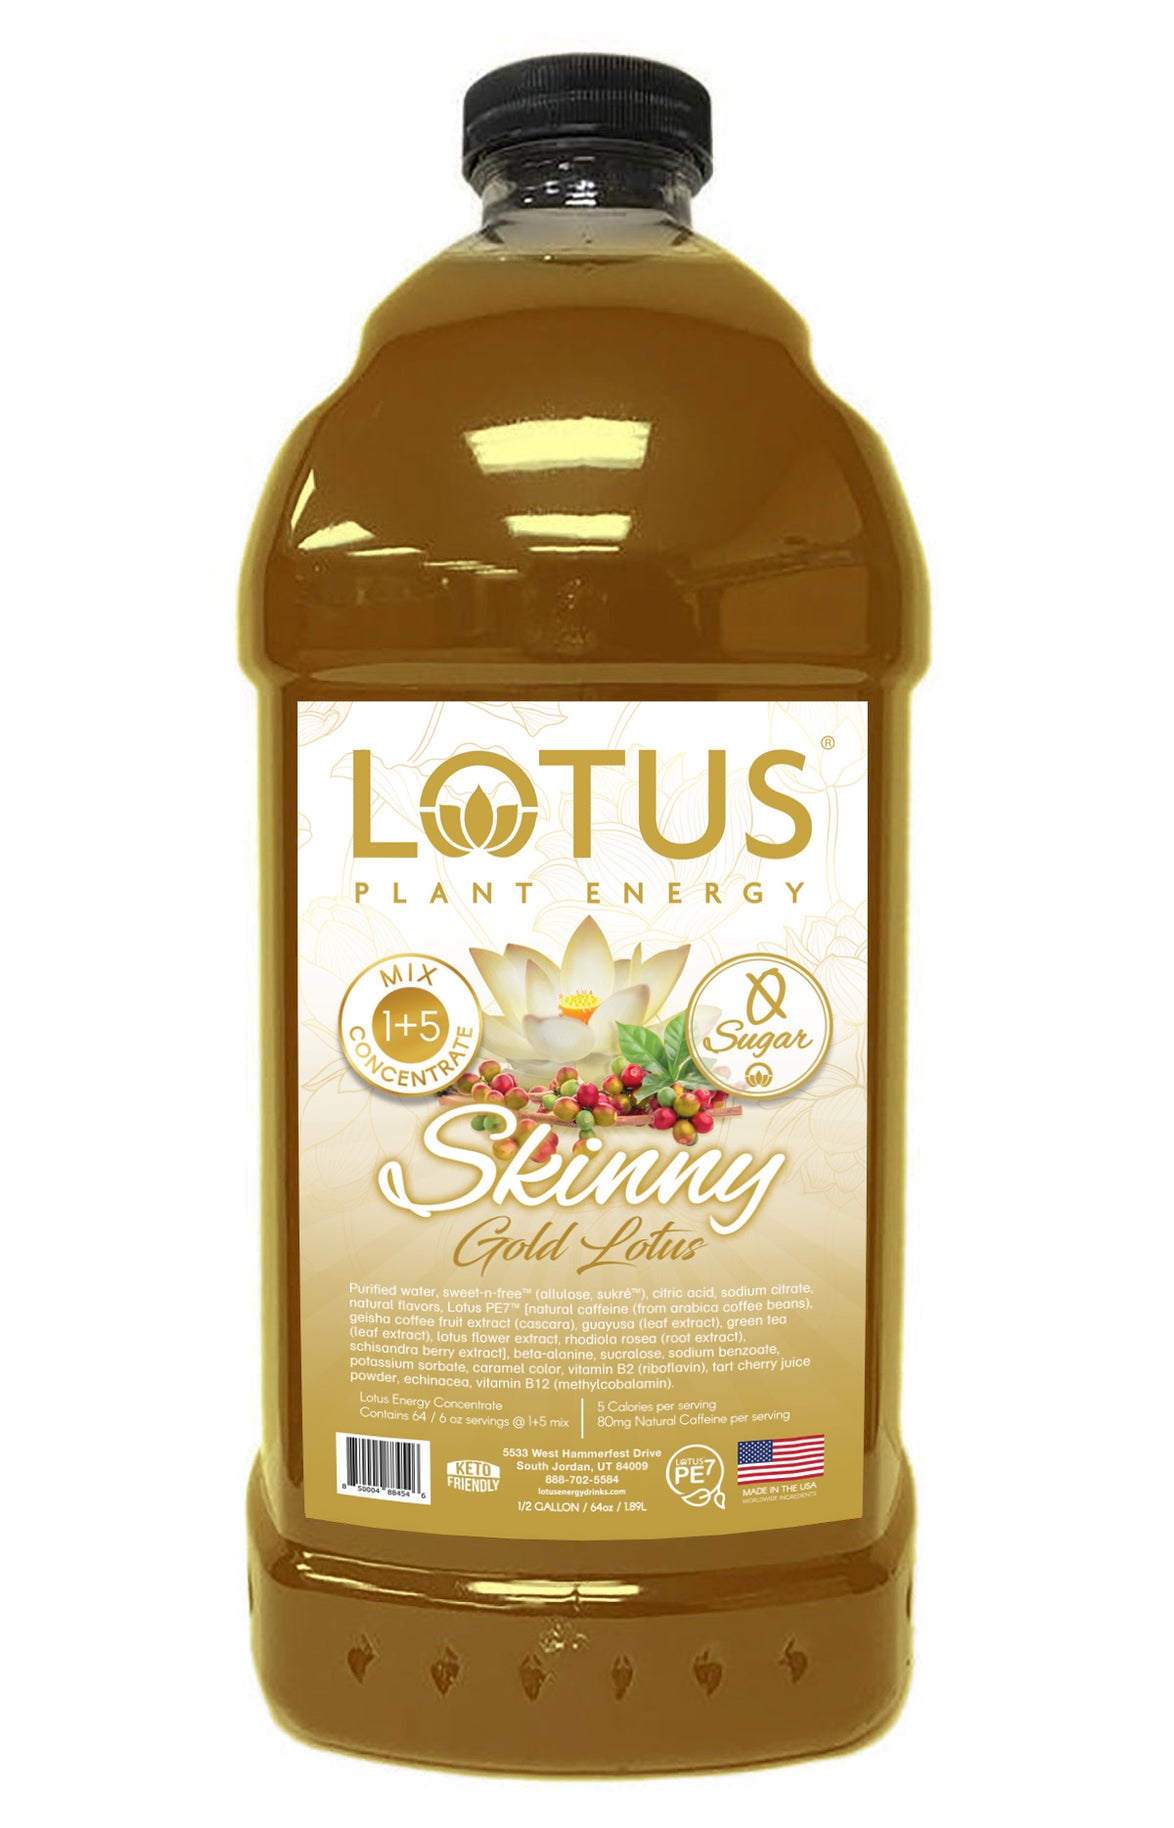 Skinny Gold Lotus Energy Concentrate